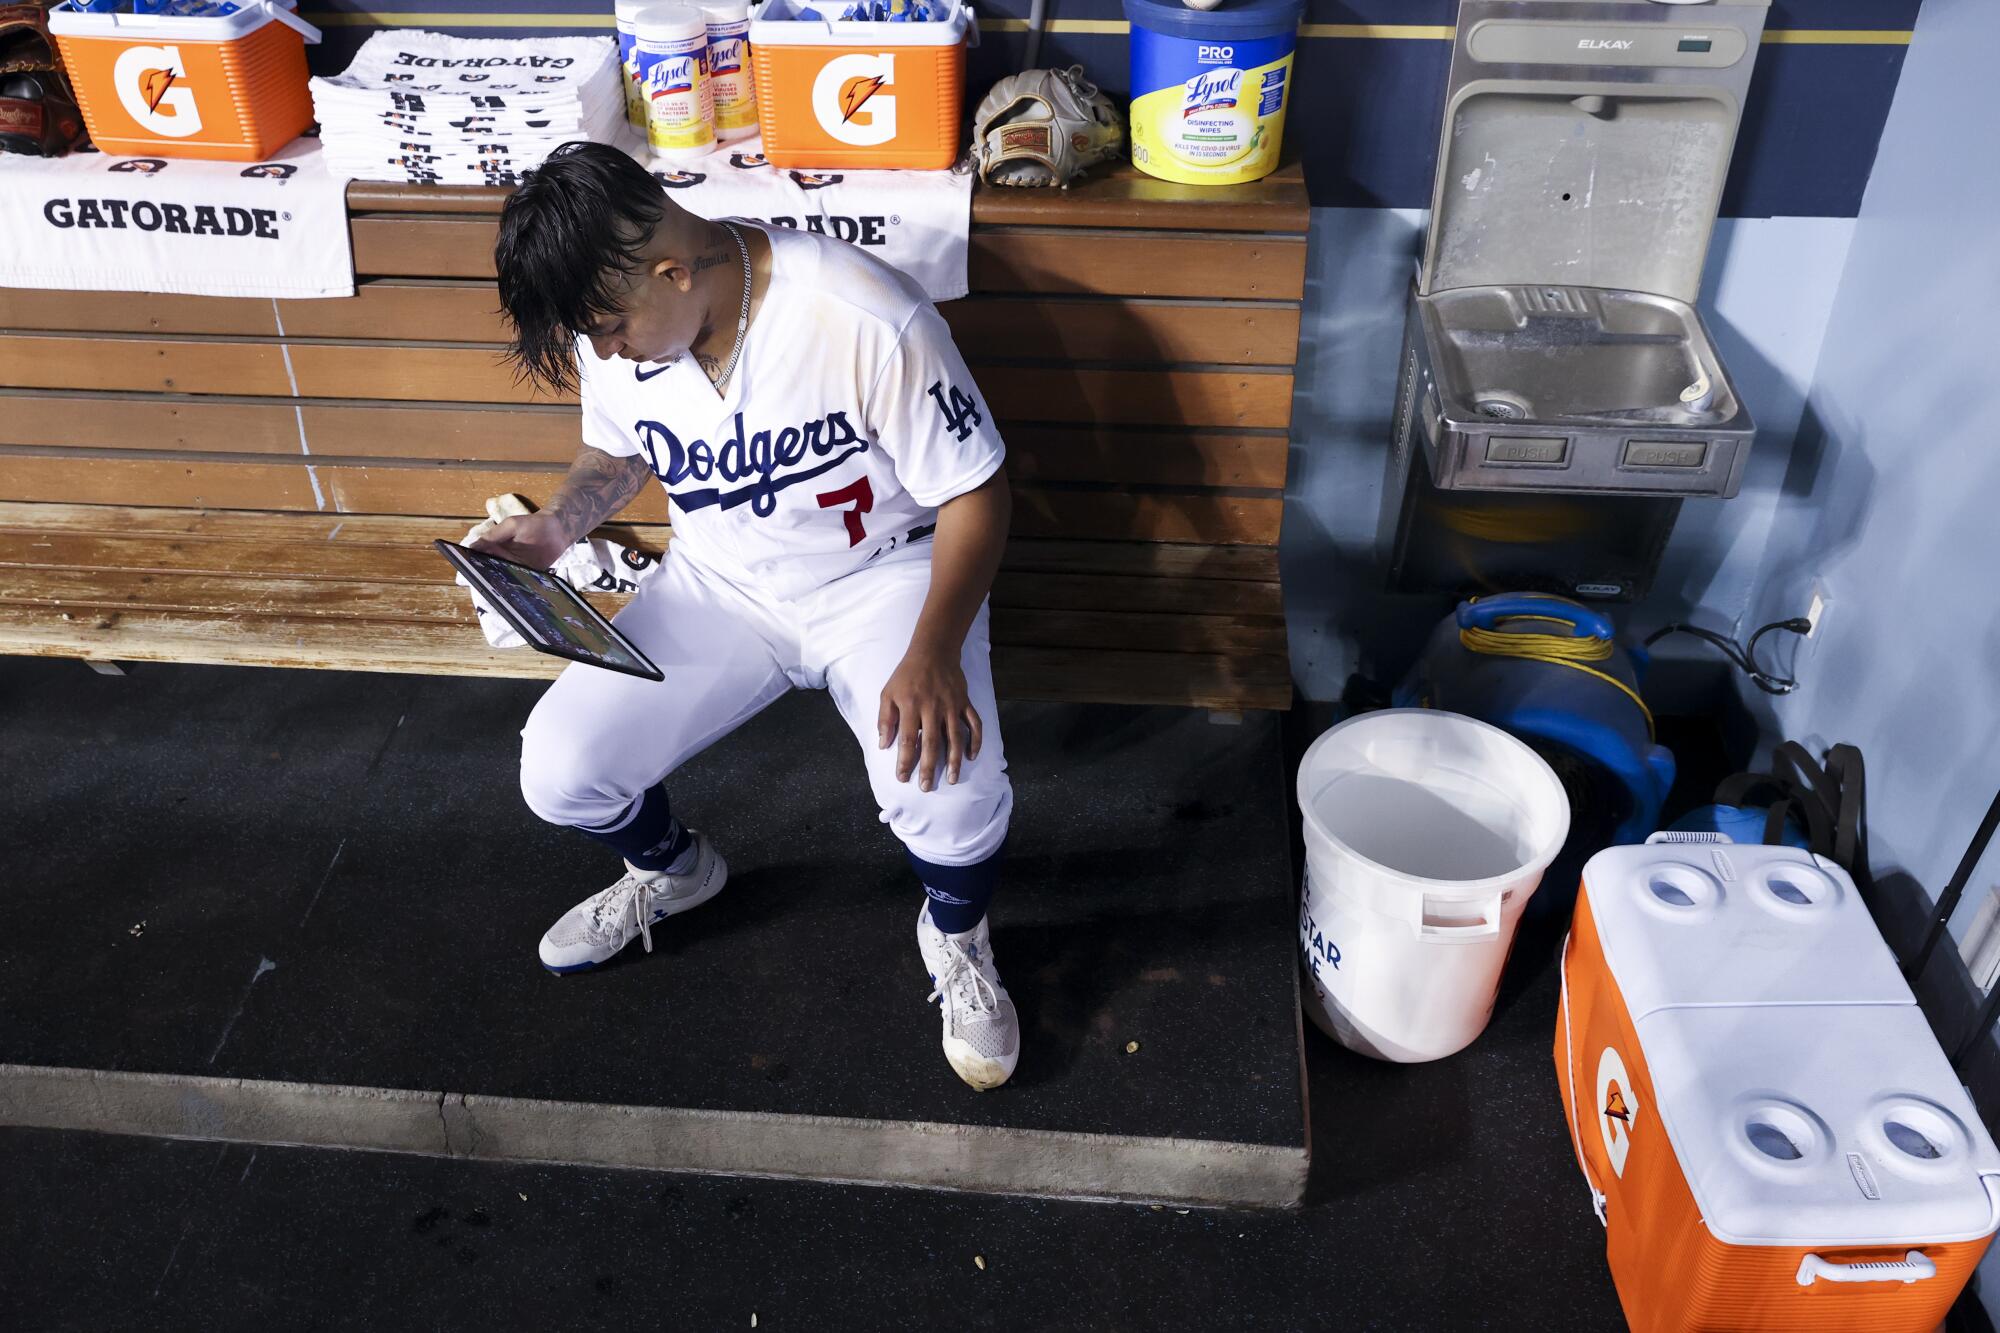 Dodgers starting pitcher Julio Urías sits in the dugout watching plays with a tablet.